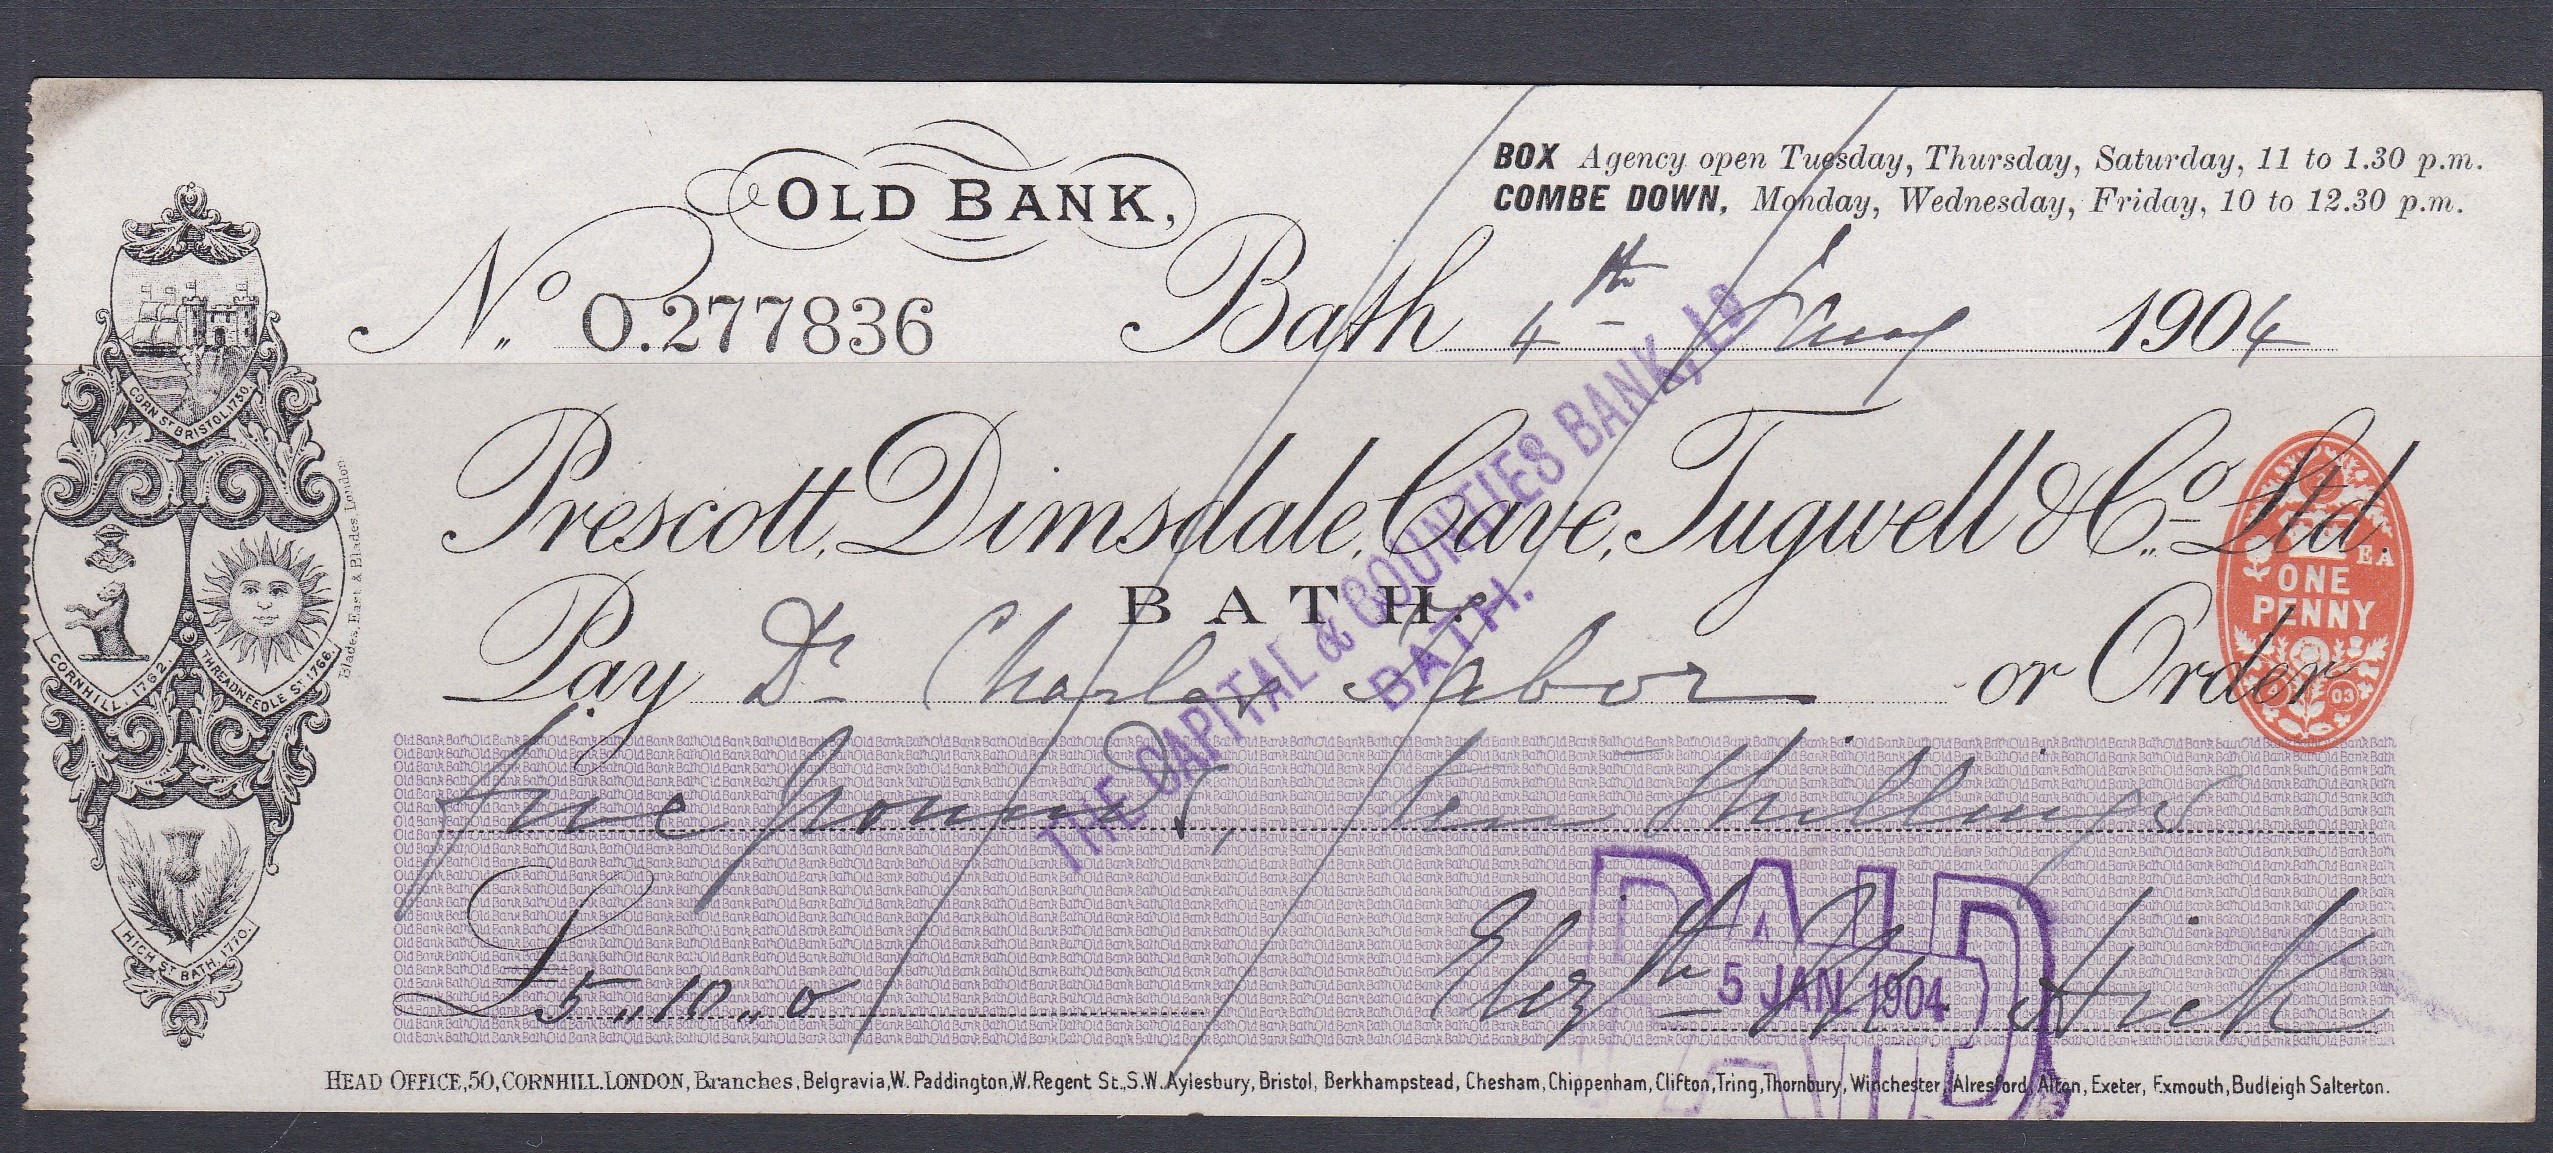 Prescott Dimsdale, Cave Tugwell & Co Ltd-Old Bank, Bath-Box & Combe Down Agency- used order RO 2.4.